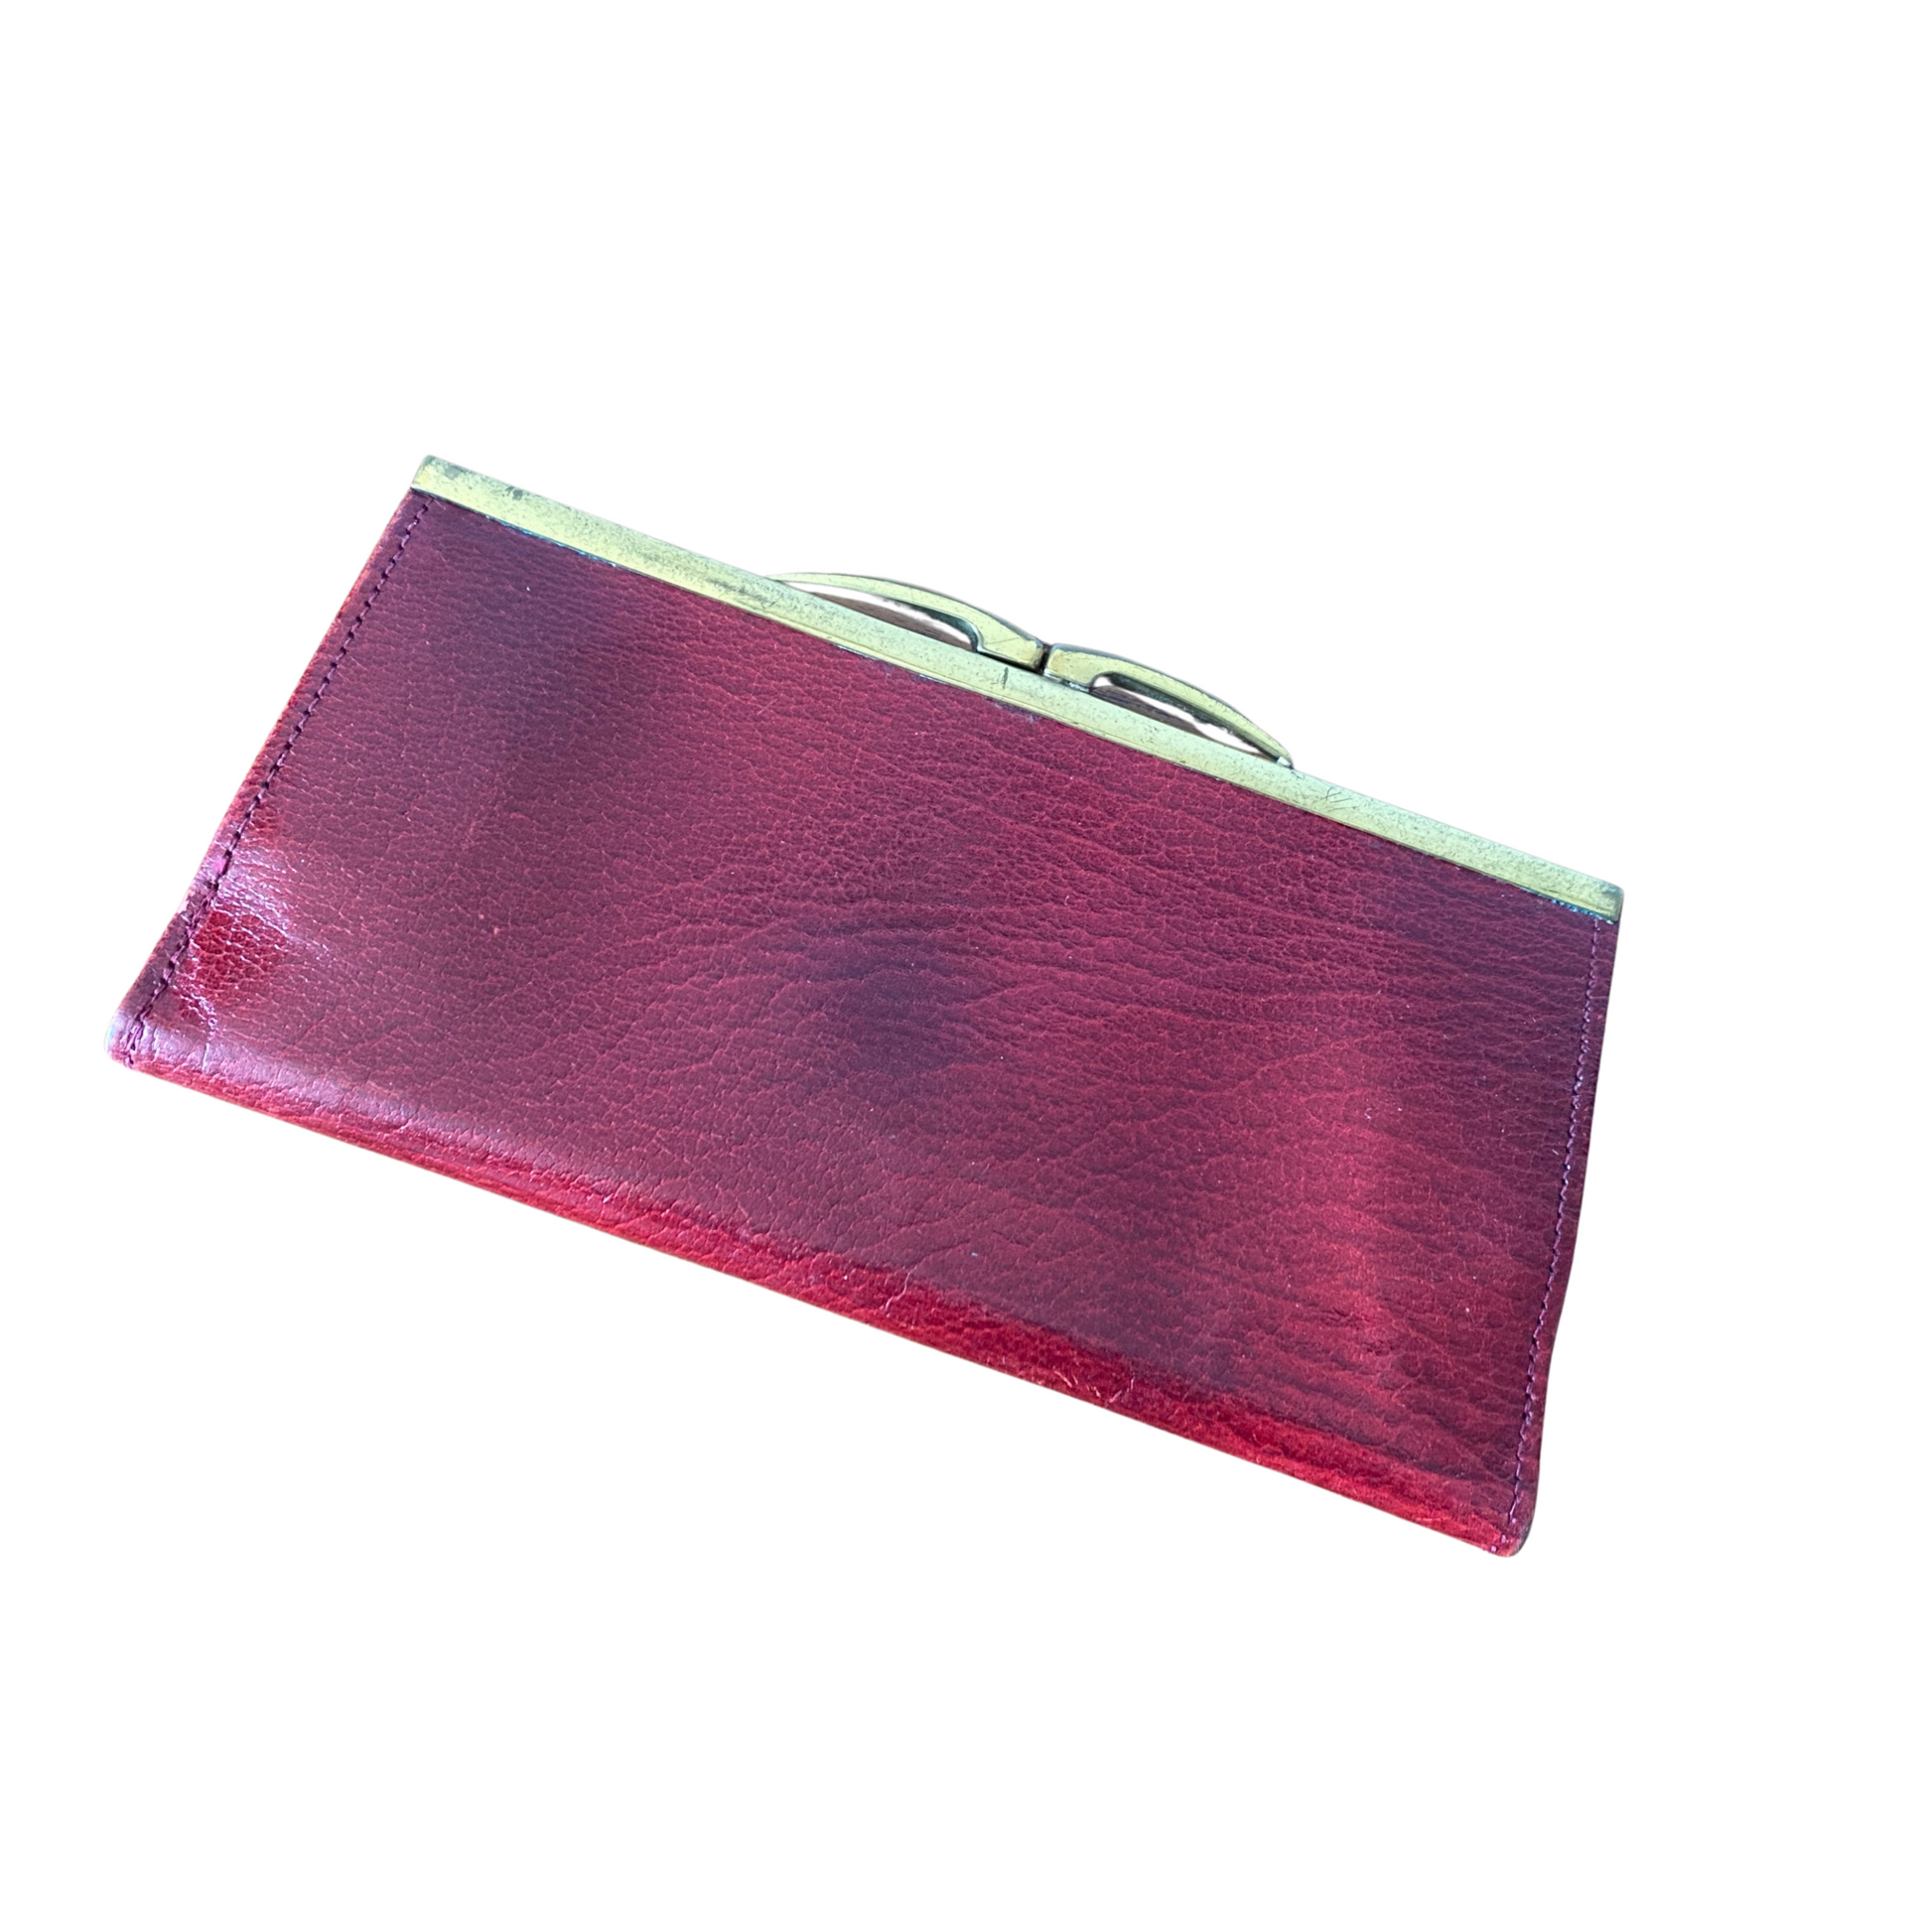 Textured dark red leather wallet with a gold tone covered popper opening and gold-tone metal frame